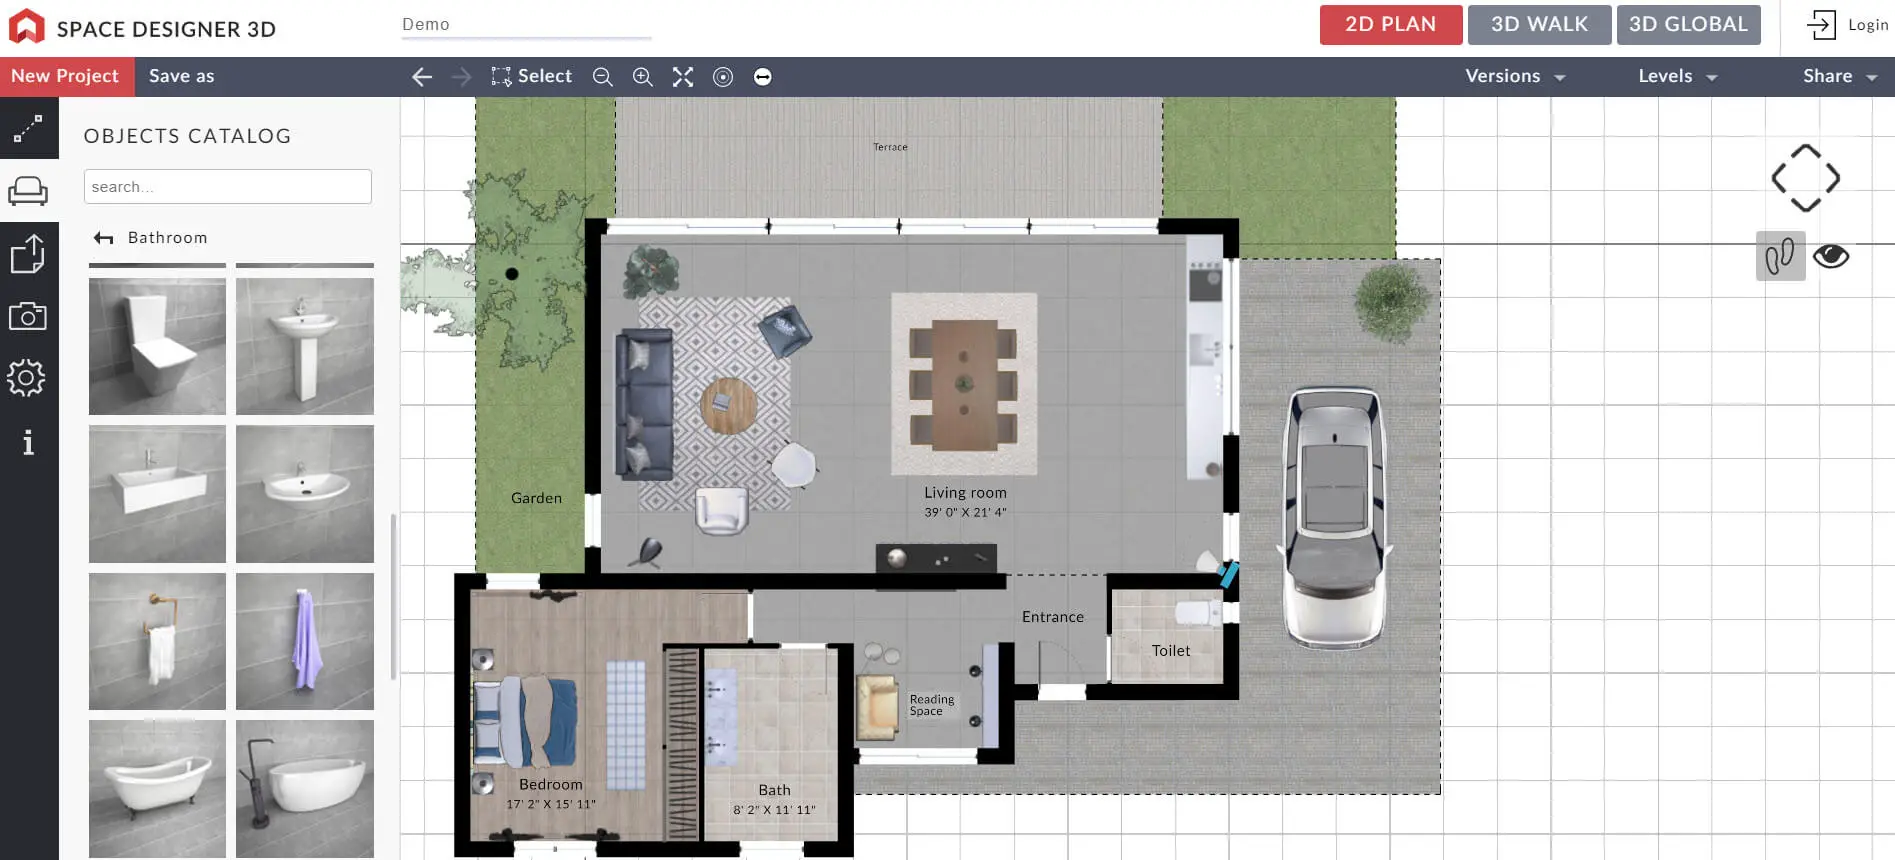 Space Designer 3D generates house plans with ease.